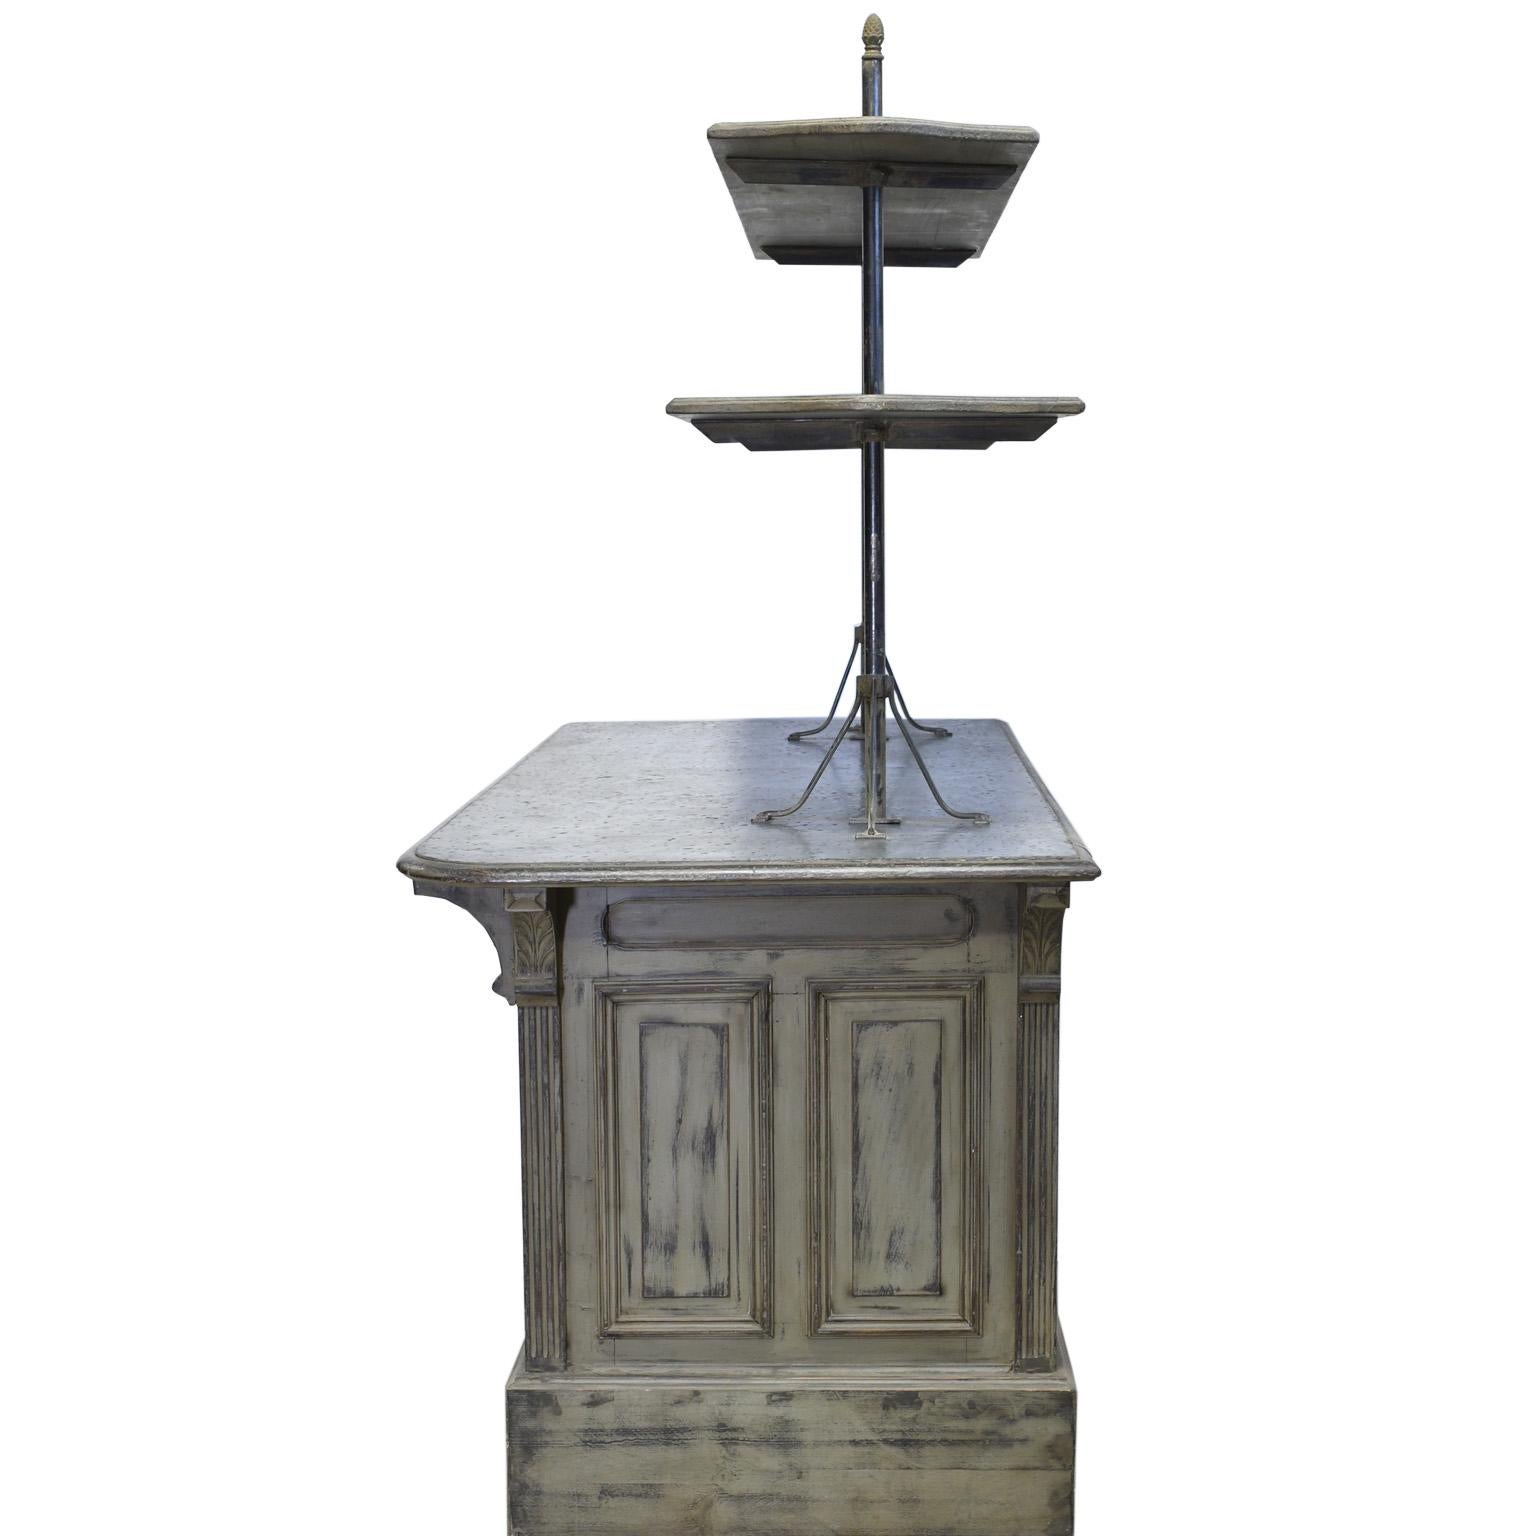 Painted Antique Victorian Store Counter with Zinc Top, England, circa 1880 (Geschnitzt)